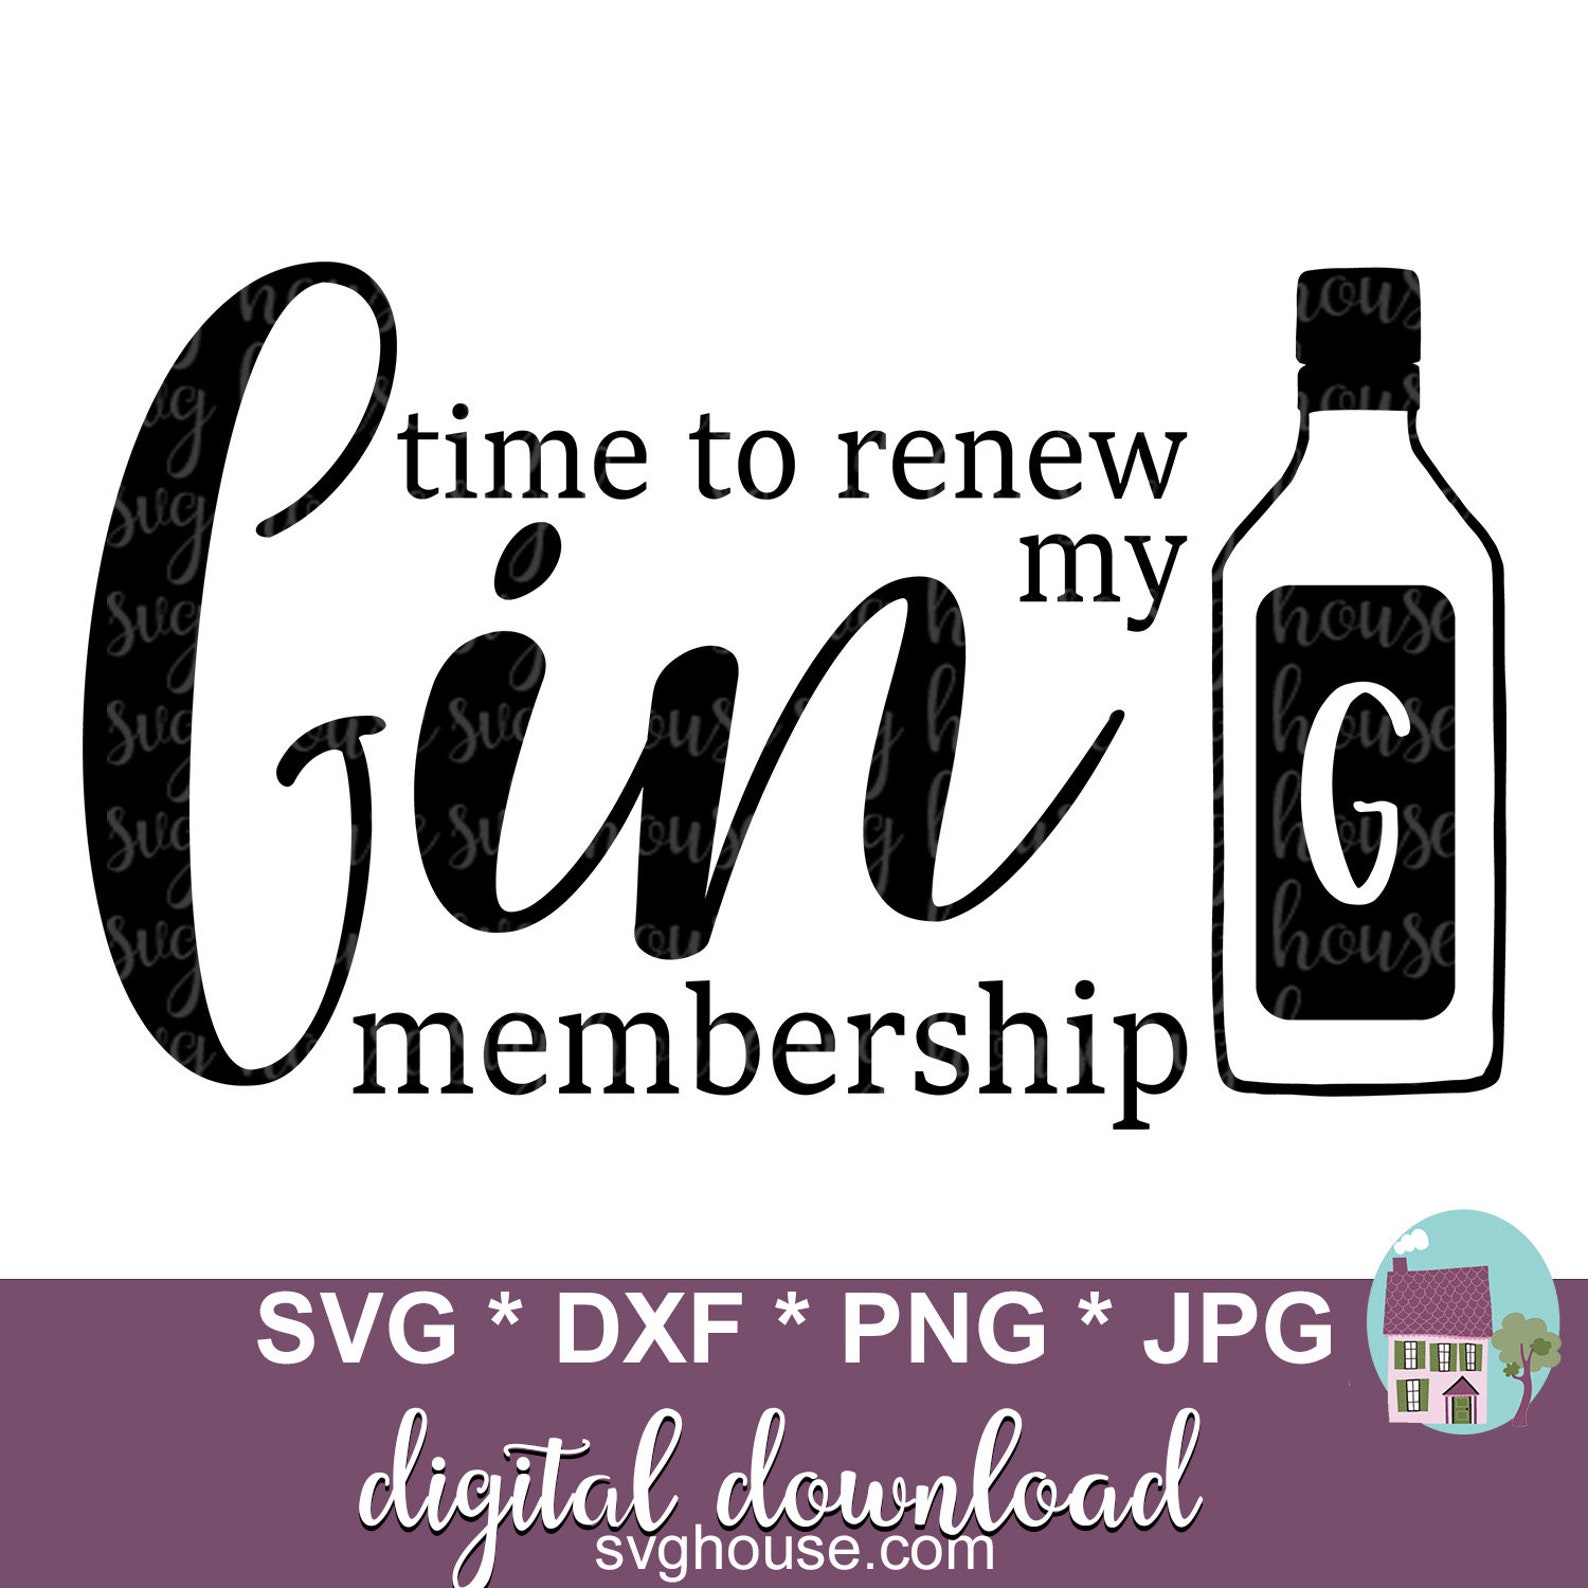 Time To Renew My Gin Membership SVG File For Cricut And Etsy